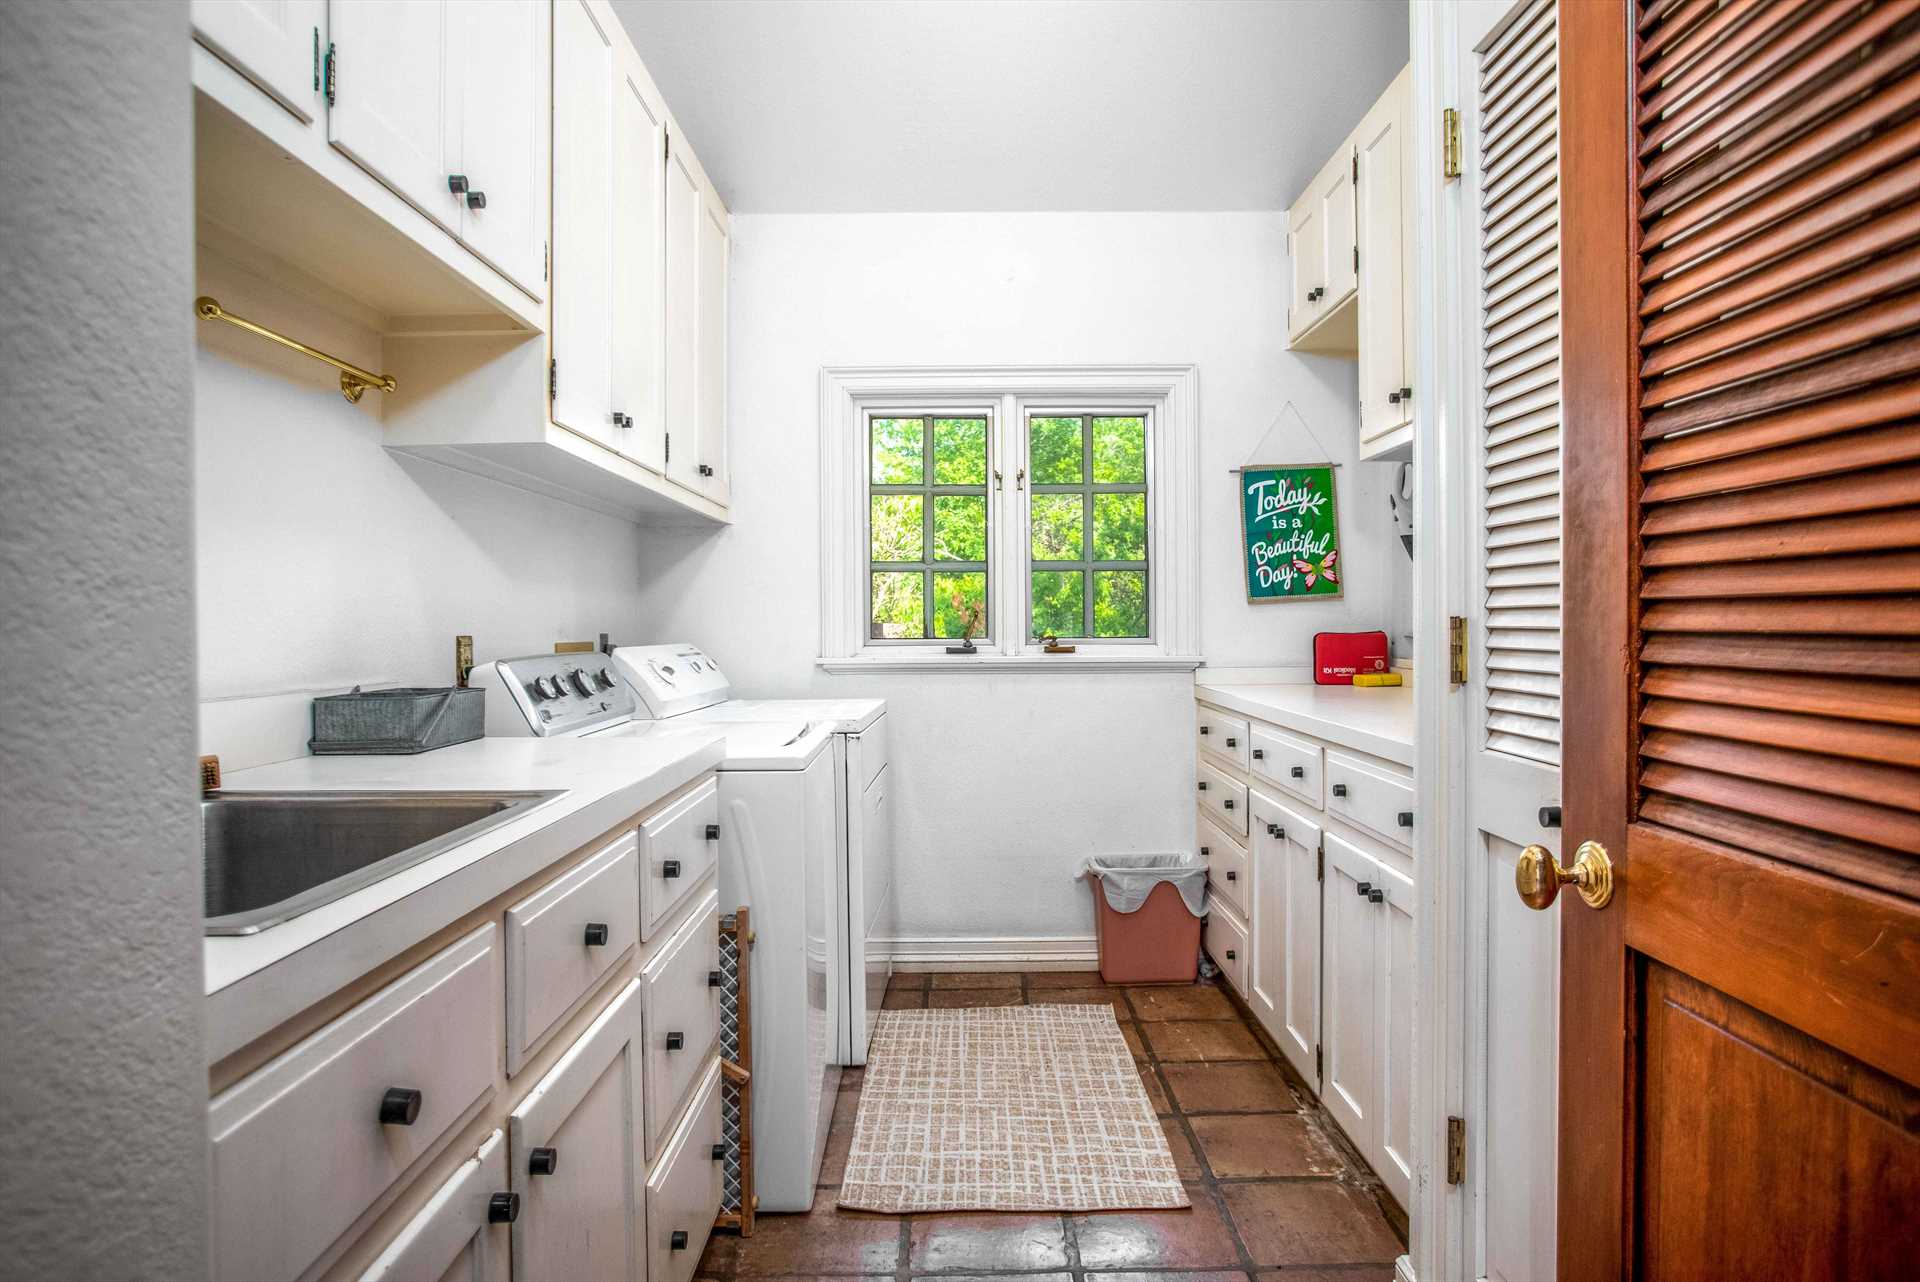                                                 Don't let laundry pile up and spoil your fun! The utility room at the Homestead has a sink, folding space, and a washer and dryer for your convenience.